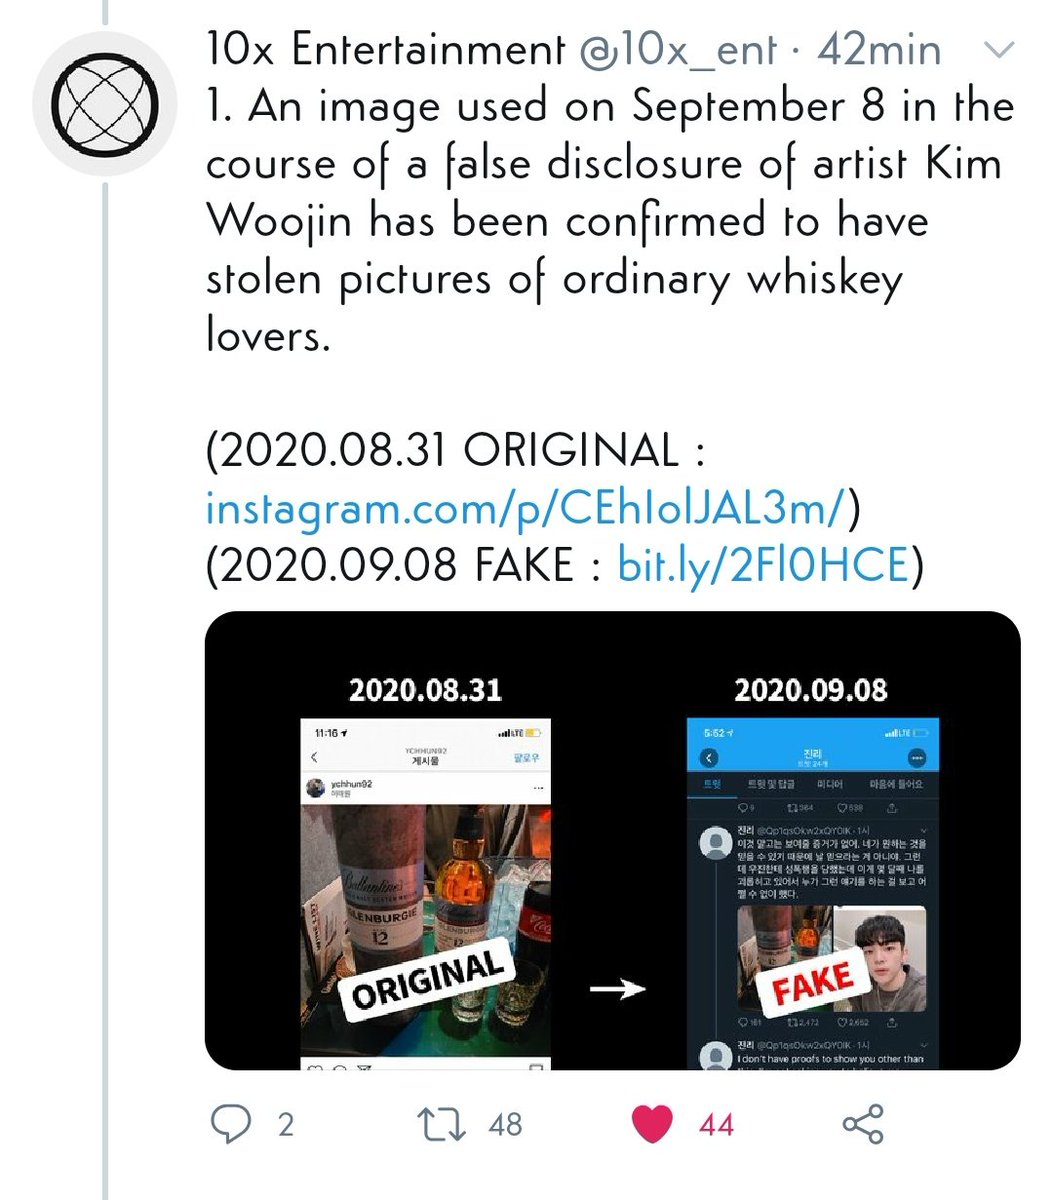 After that, they posted this alleged proof of the Southsid- Parlor photo, supposedly confirming it's fake and fabricated out of a stolen picture from an IG user. I'll be checking this with my own investigation, later tonight.